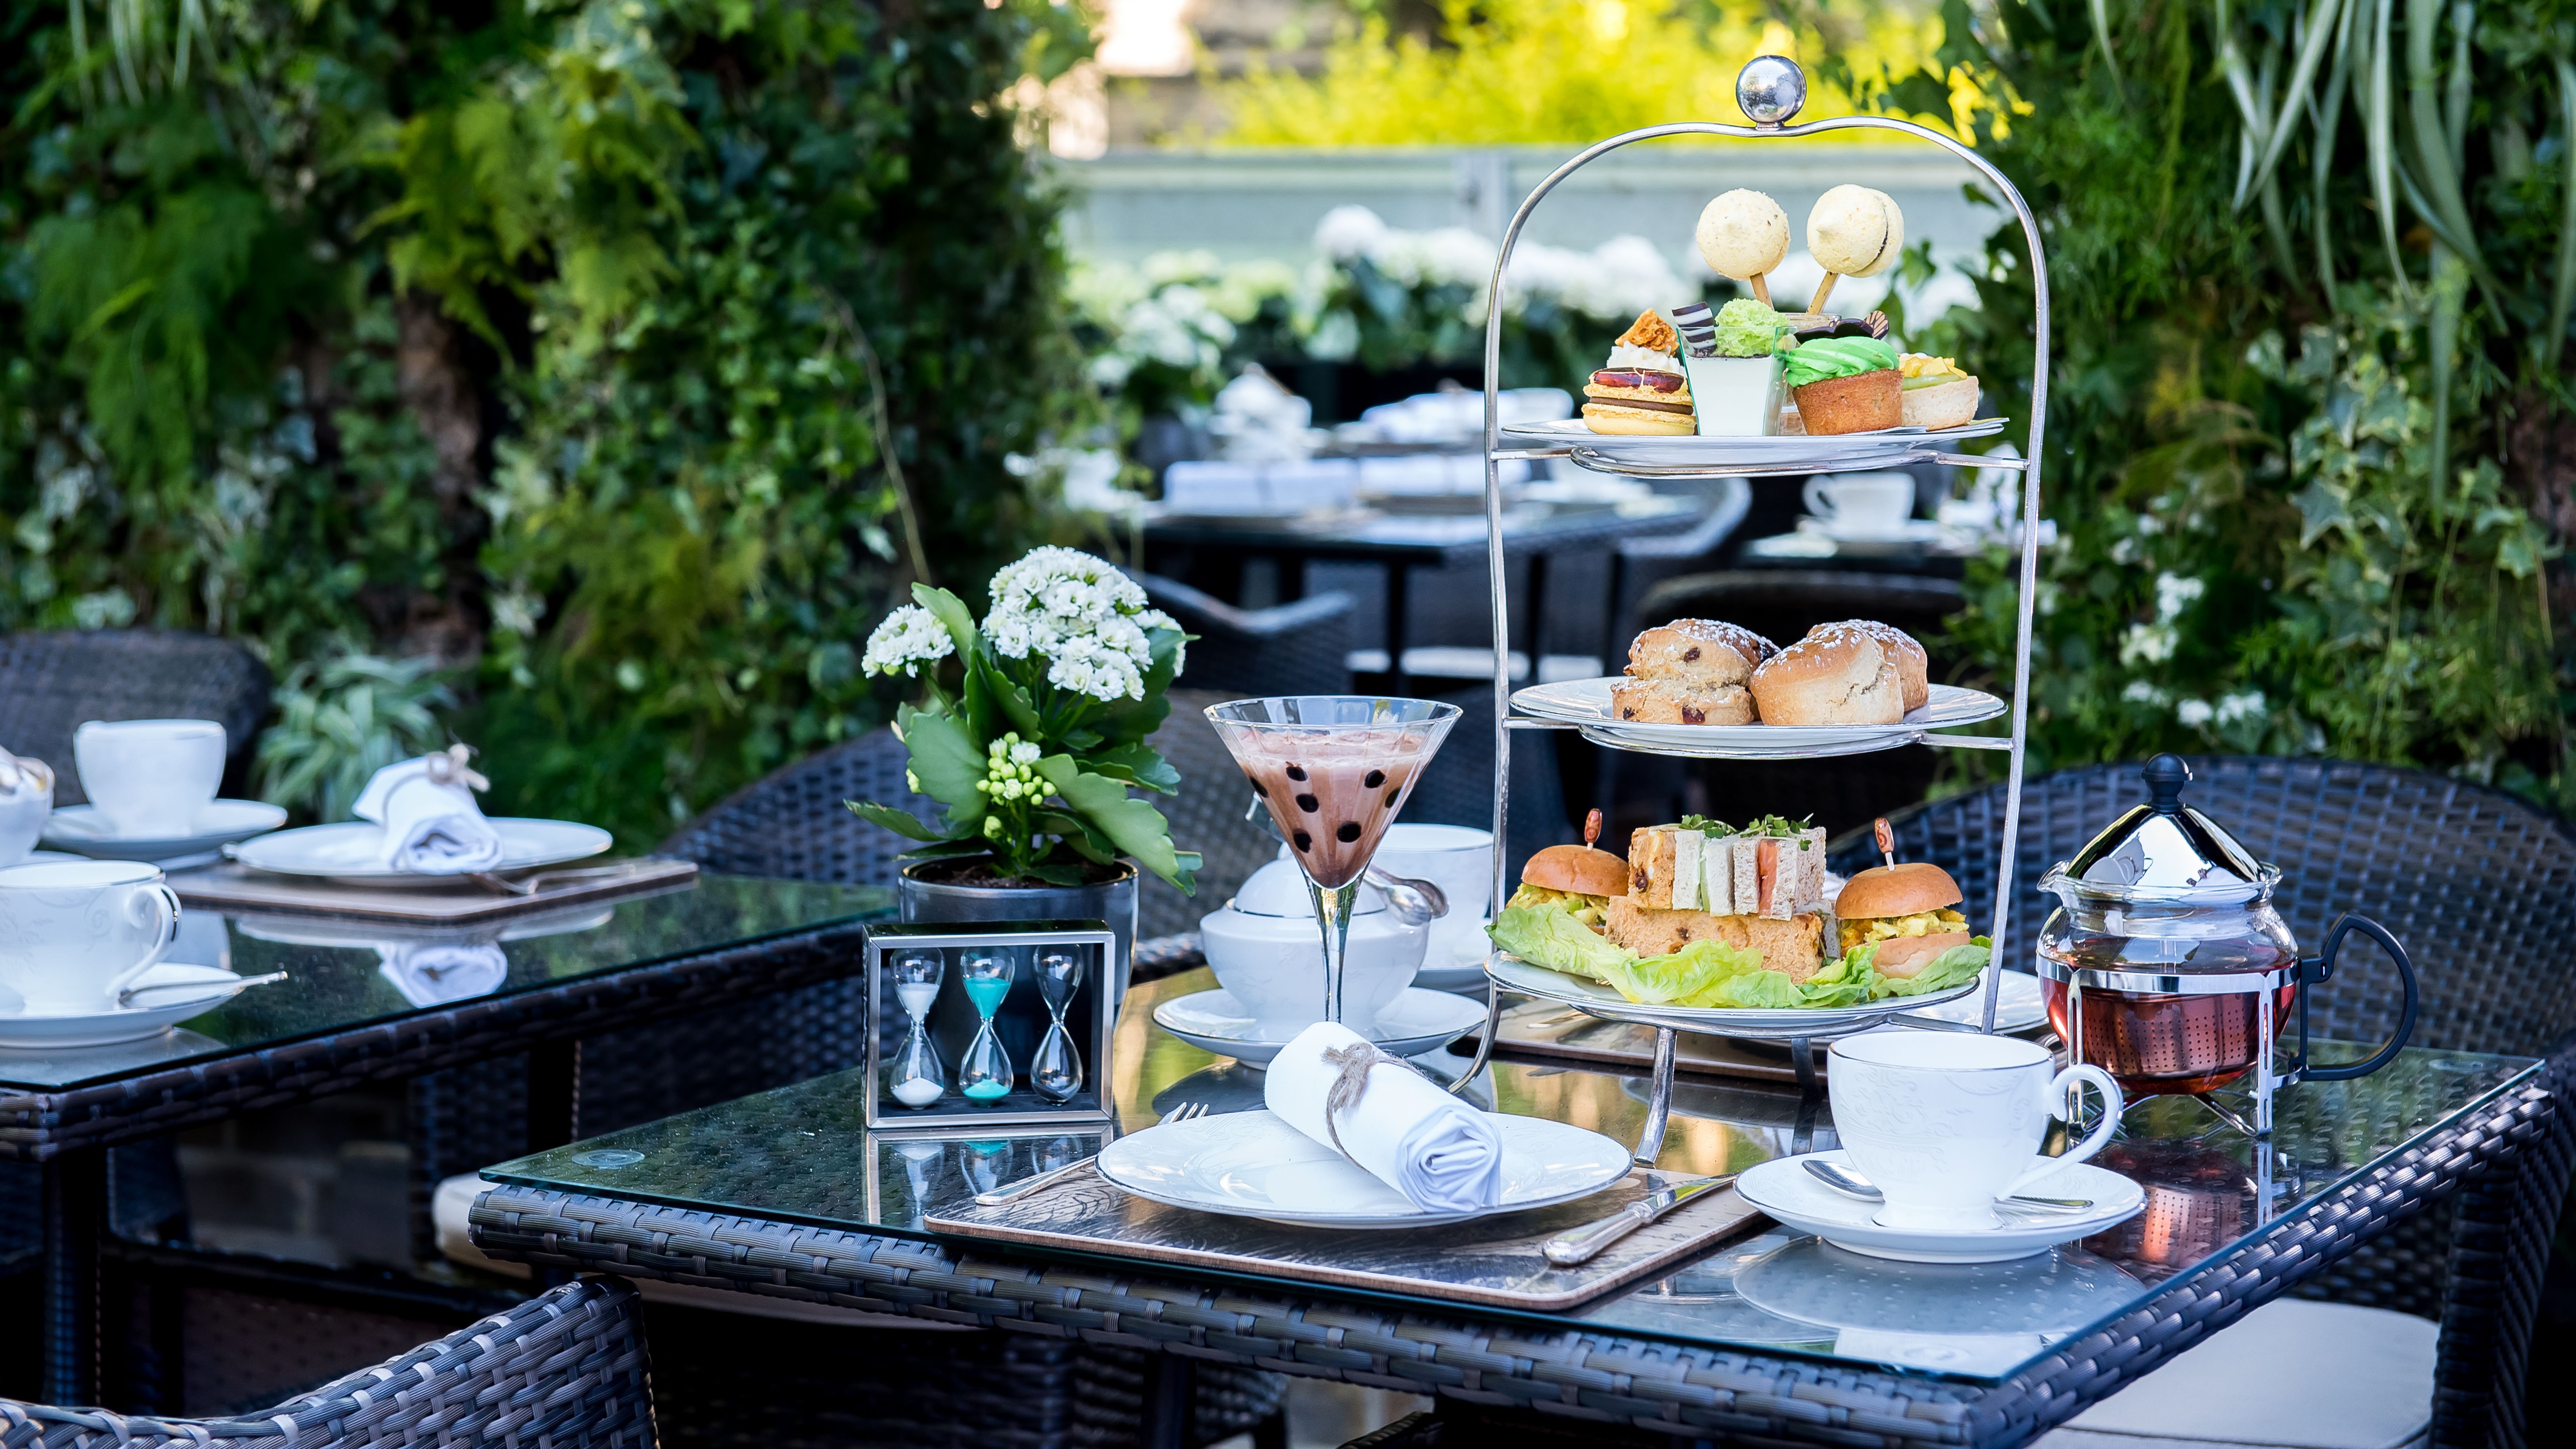 Afternoon Tea at The Montague on The Gardens, London